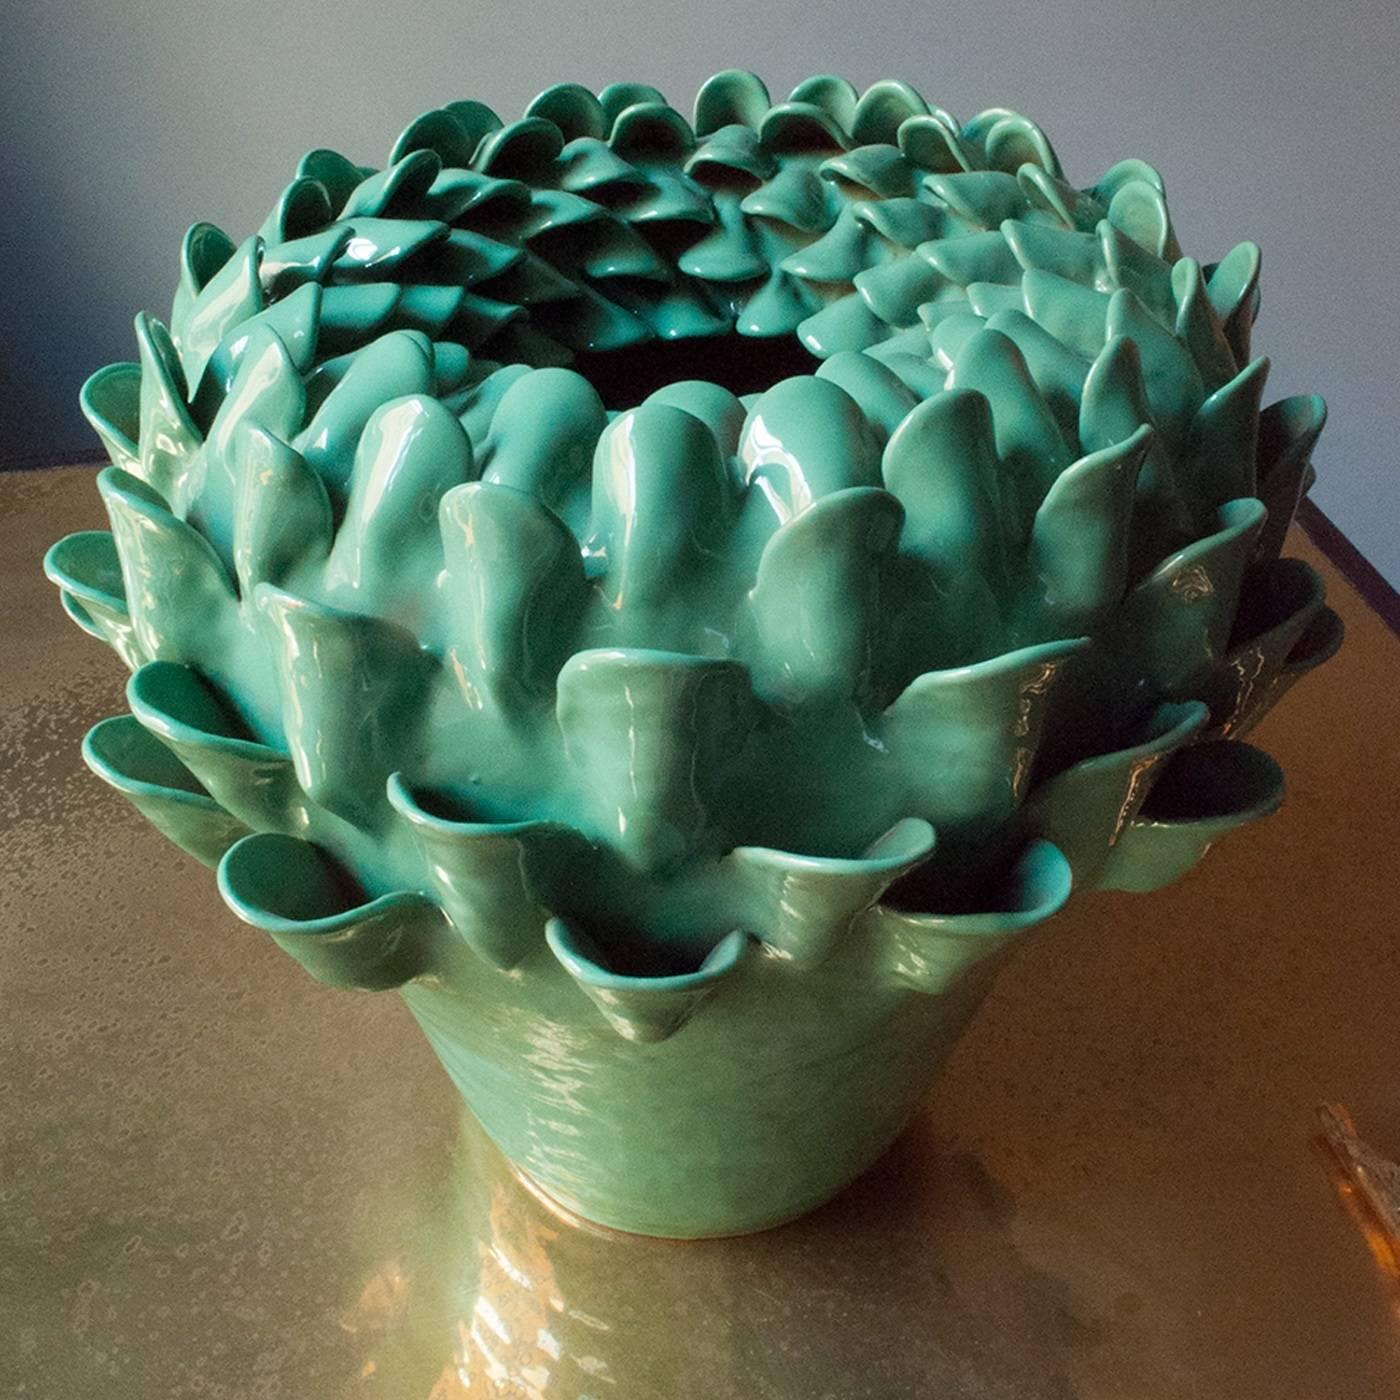 Boldly decorated with a dense raised-scale pattern that creates a three-dimensional effect, this striking terracotta vase is part of the Artemisia collection and completely handmade by expert artisans. Its crisp green glaze brings the hand-carved